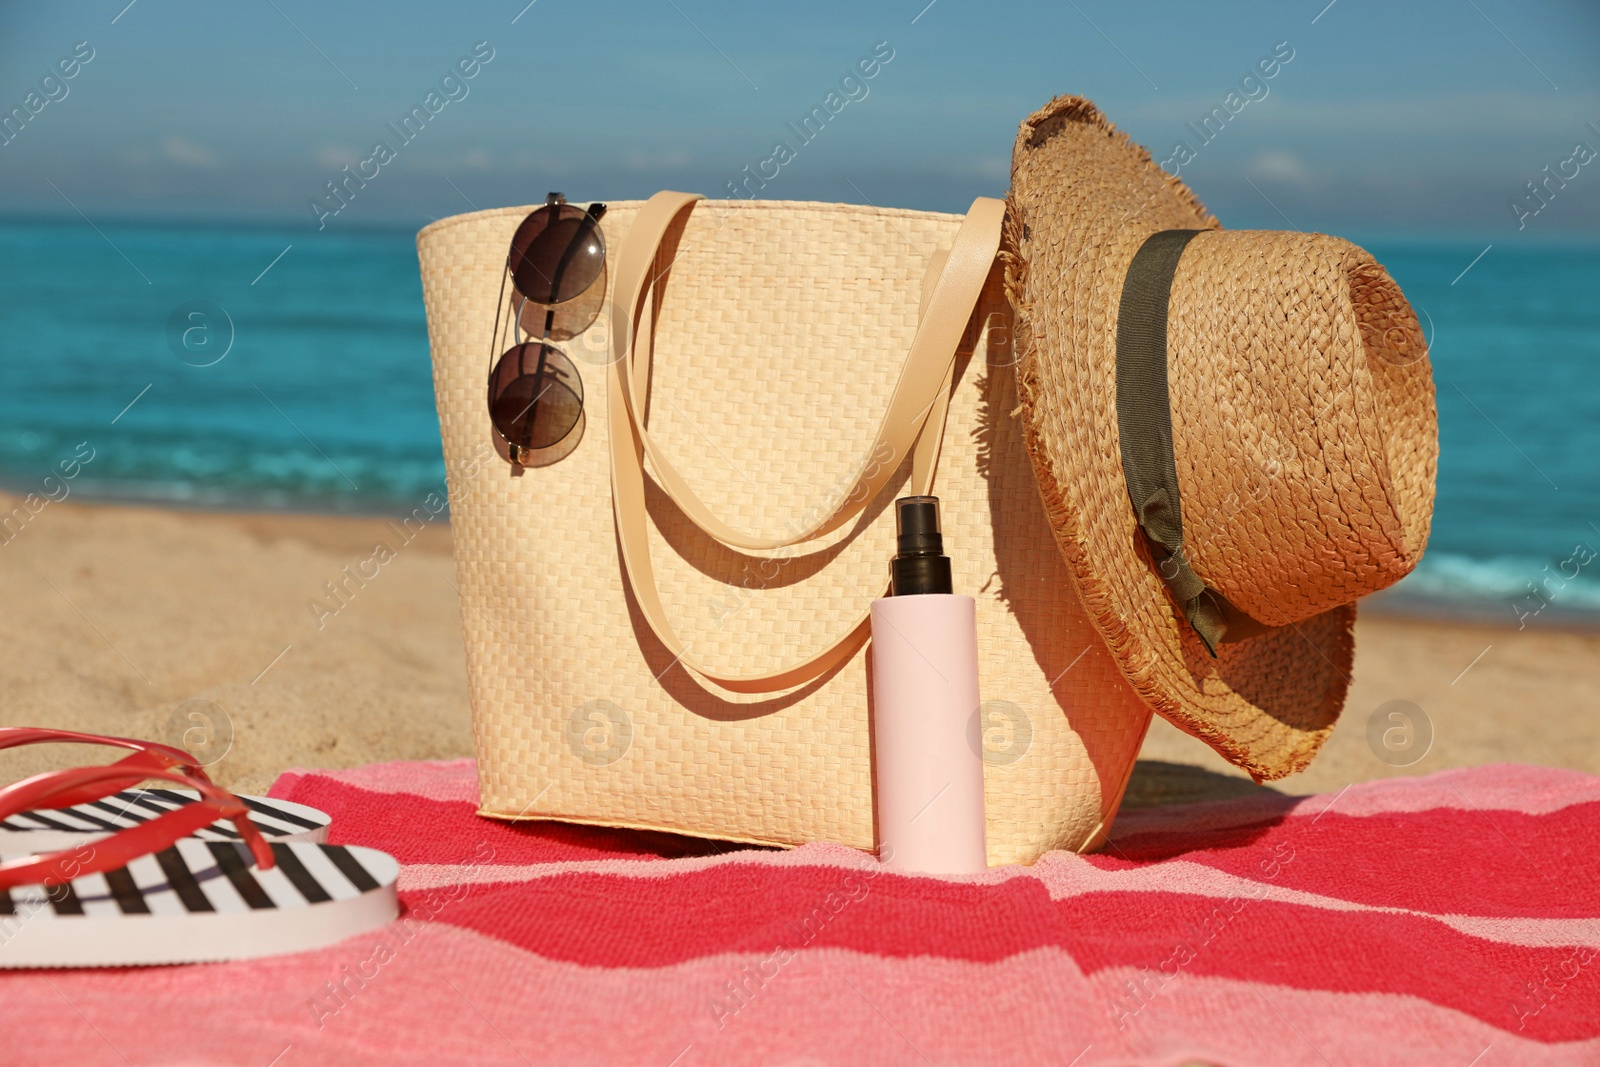 Photo of Straw hat, bag and other beach items on sandy seashore